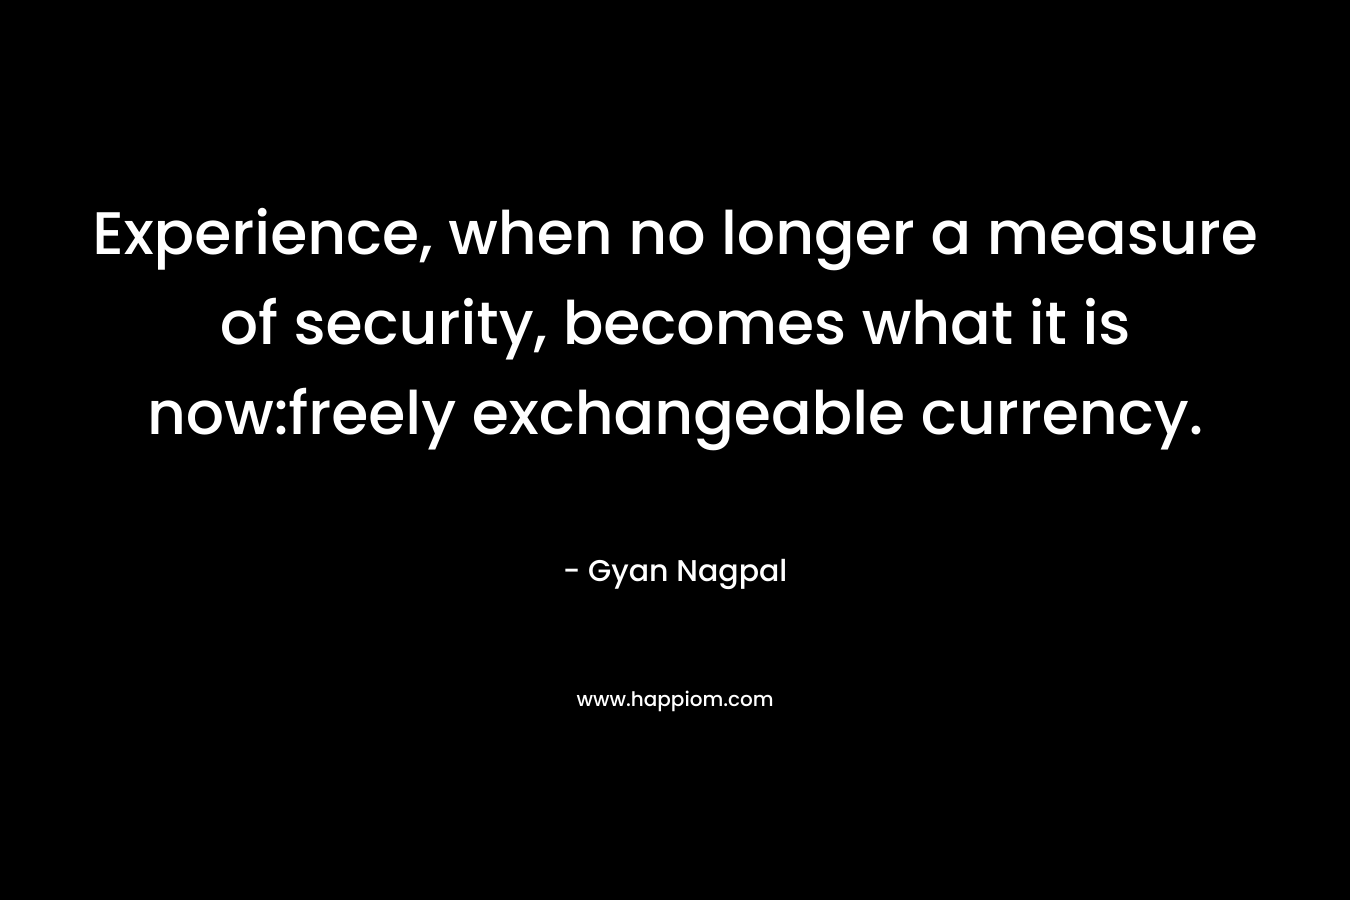 Experience, when no longer a measure of security, becomes what it is now:freely exchangeable currency. – Gyan Nagpal